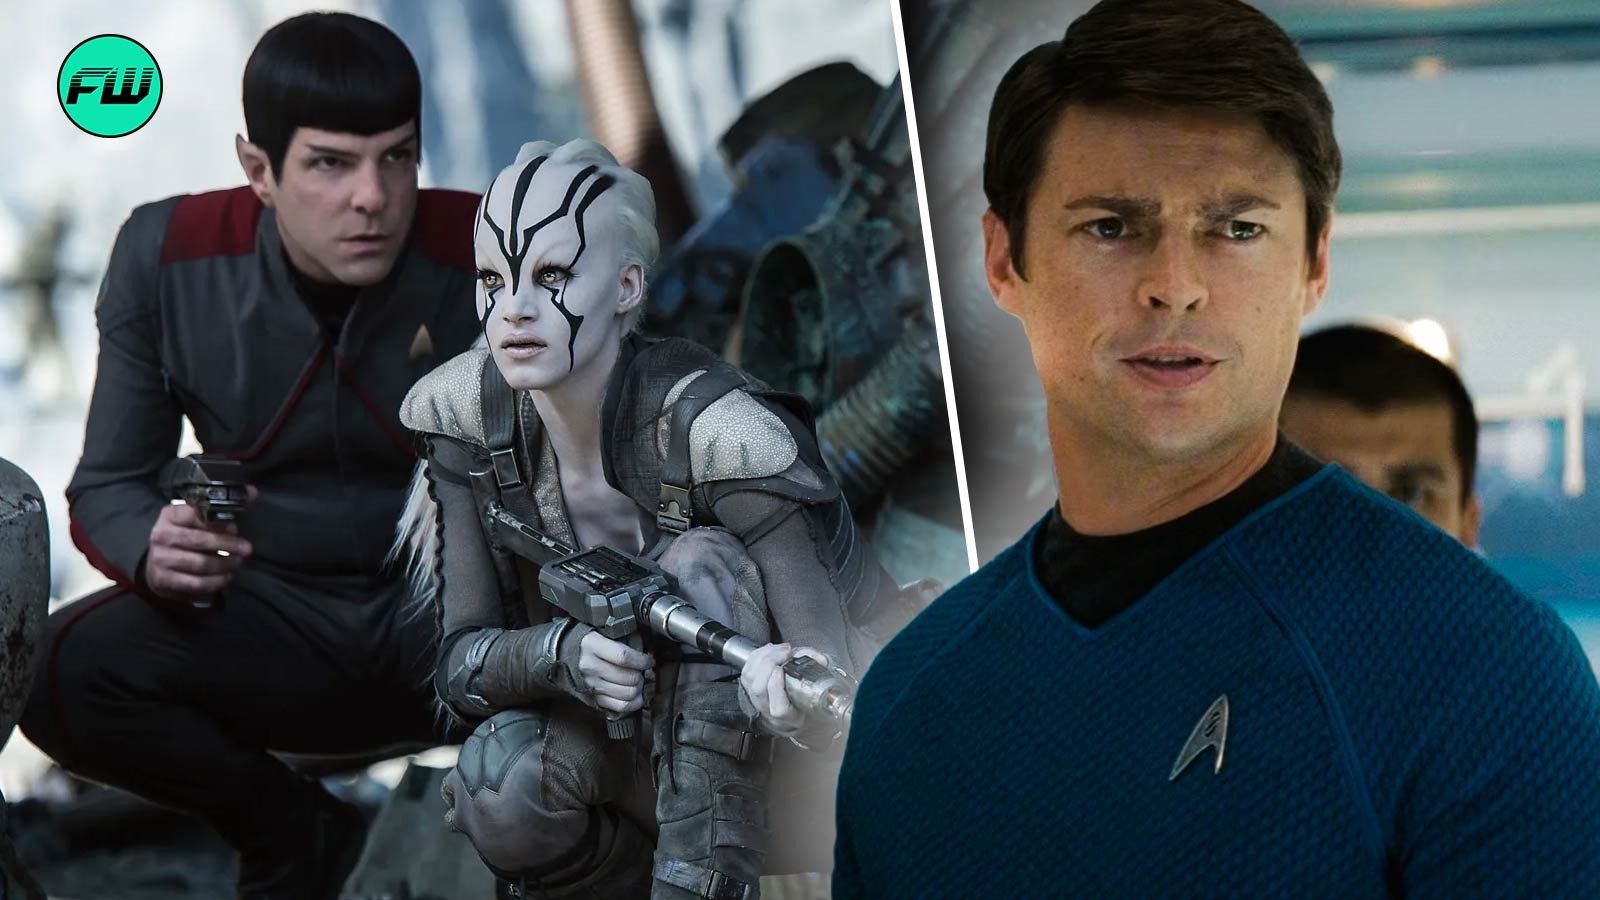 Karl Urban seems to have the upper hand over Chris Pine as Star Trek fans compare their cast in the .26 billion franchise